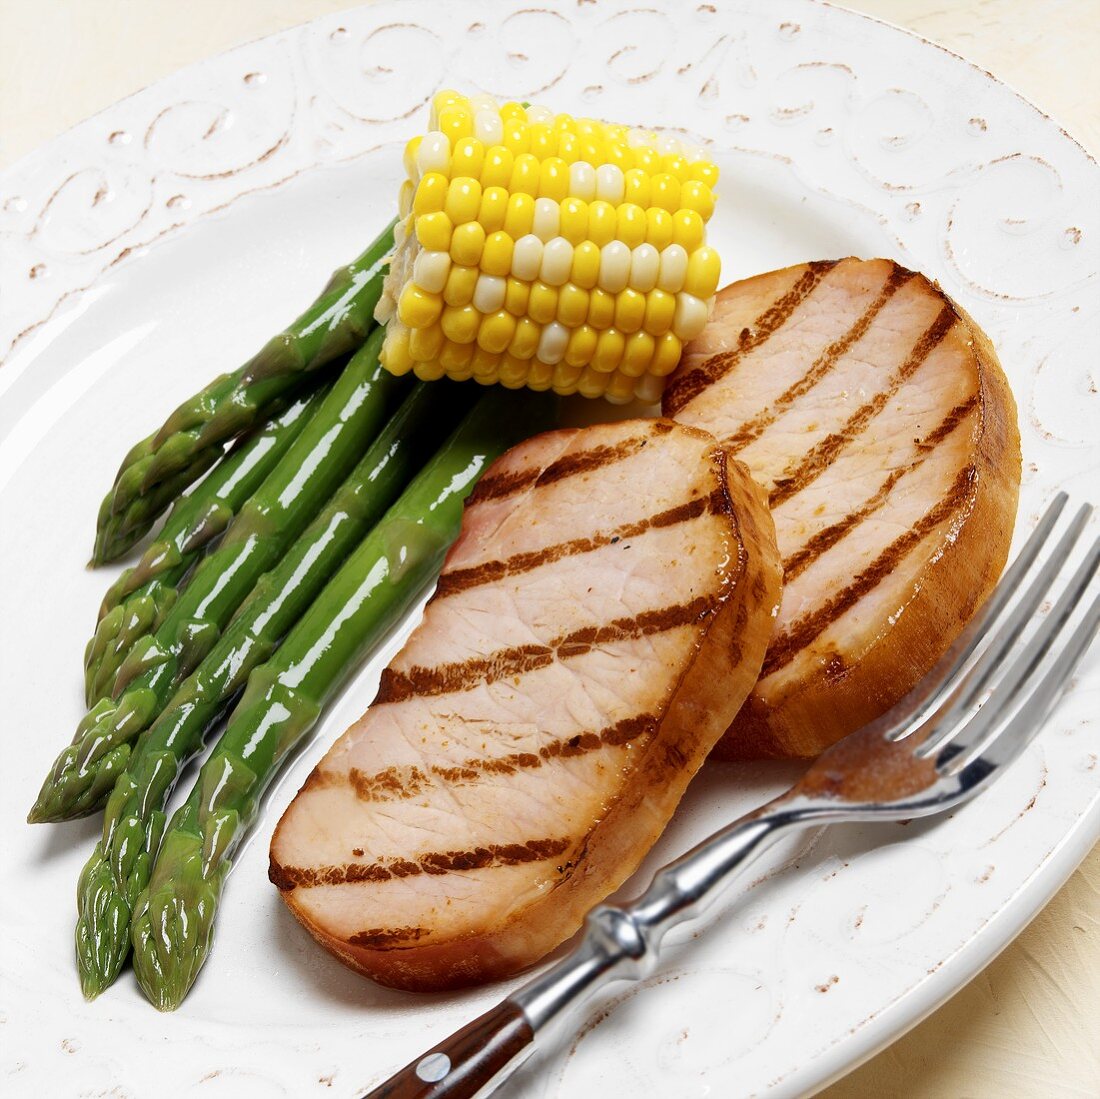 Two grilled smoked pork chops with green asparagus & sweetcorn